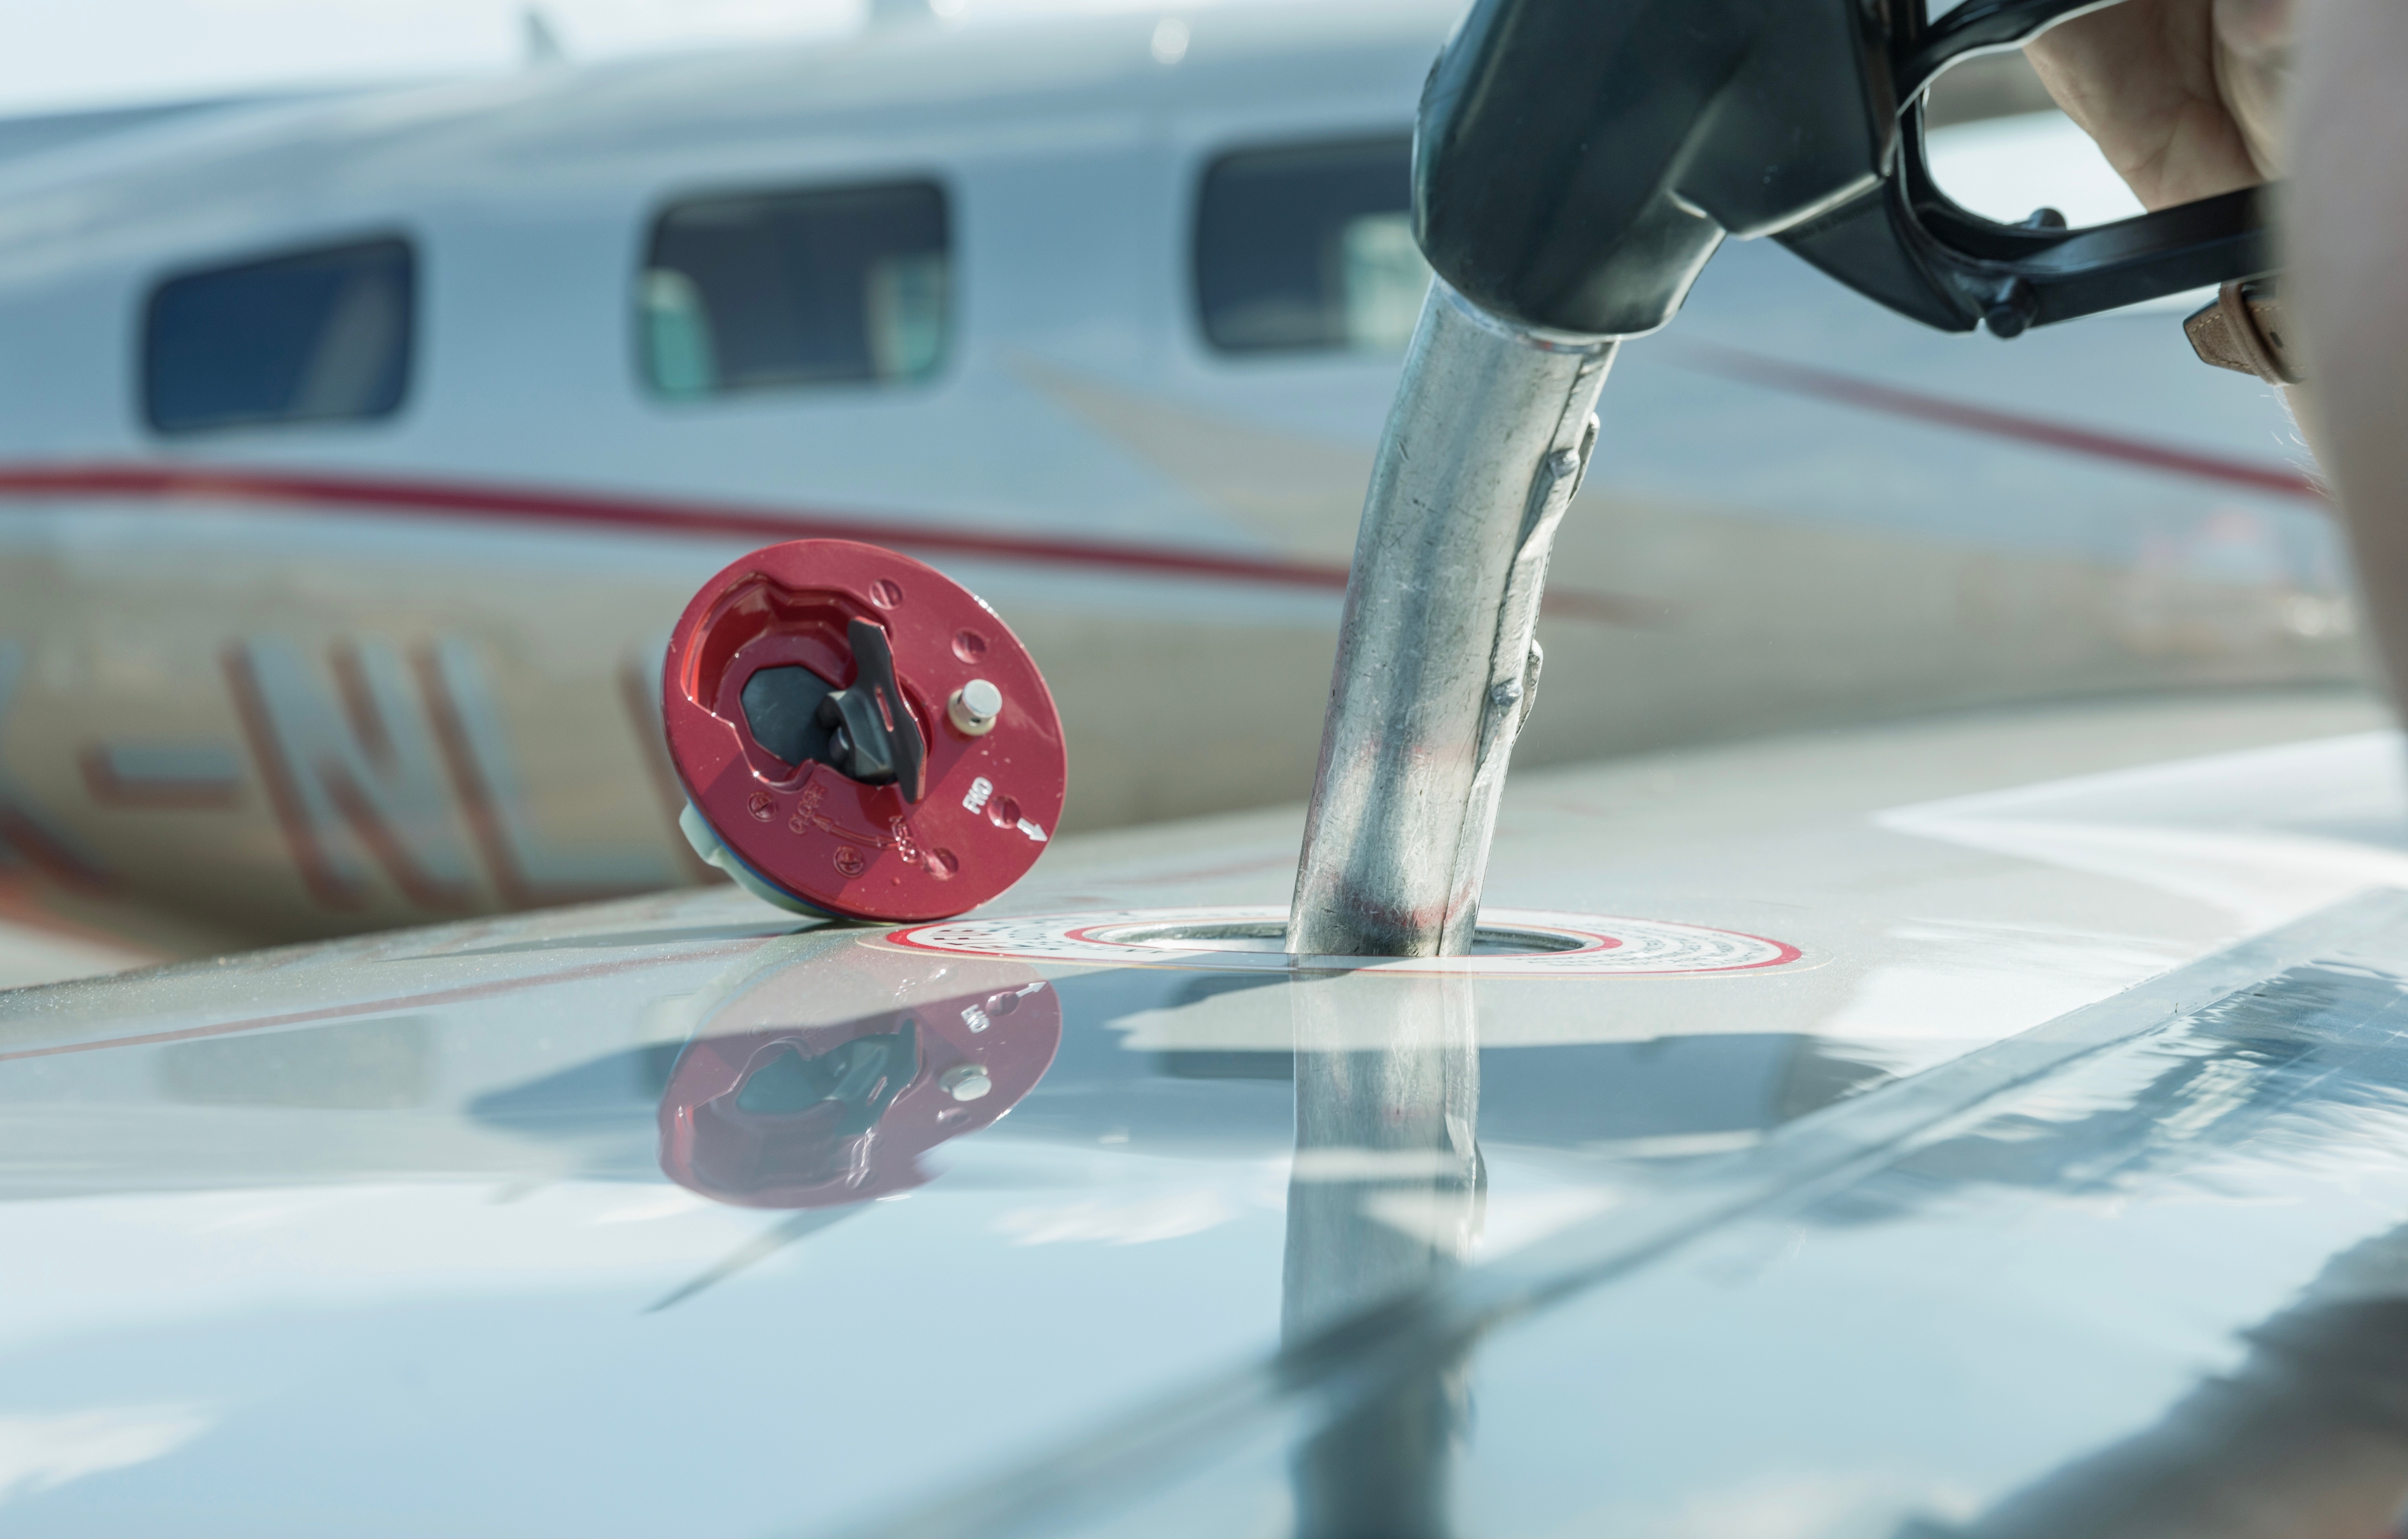 Fueling an airplane